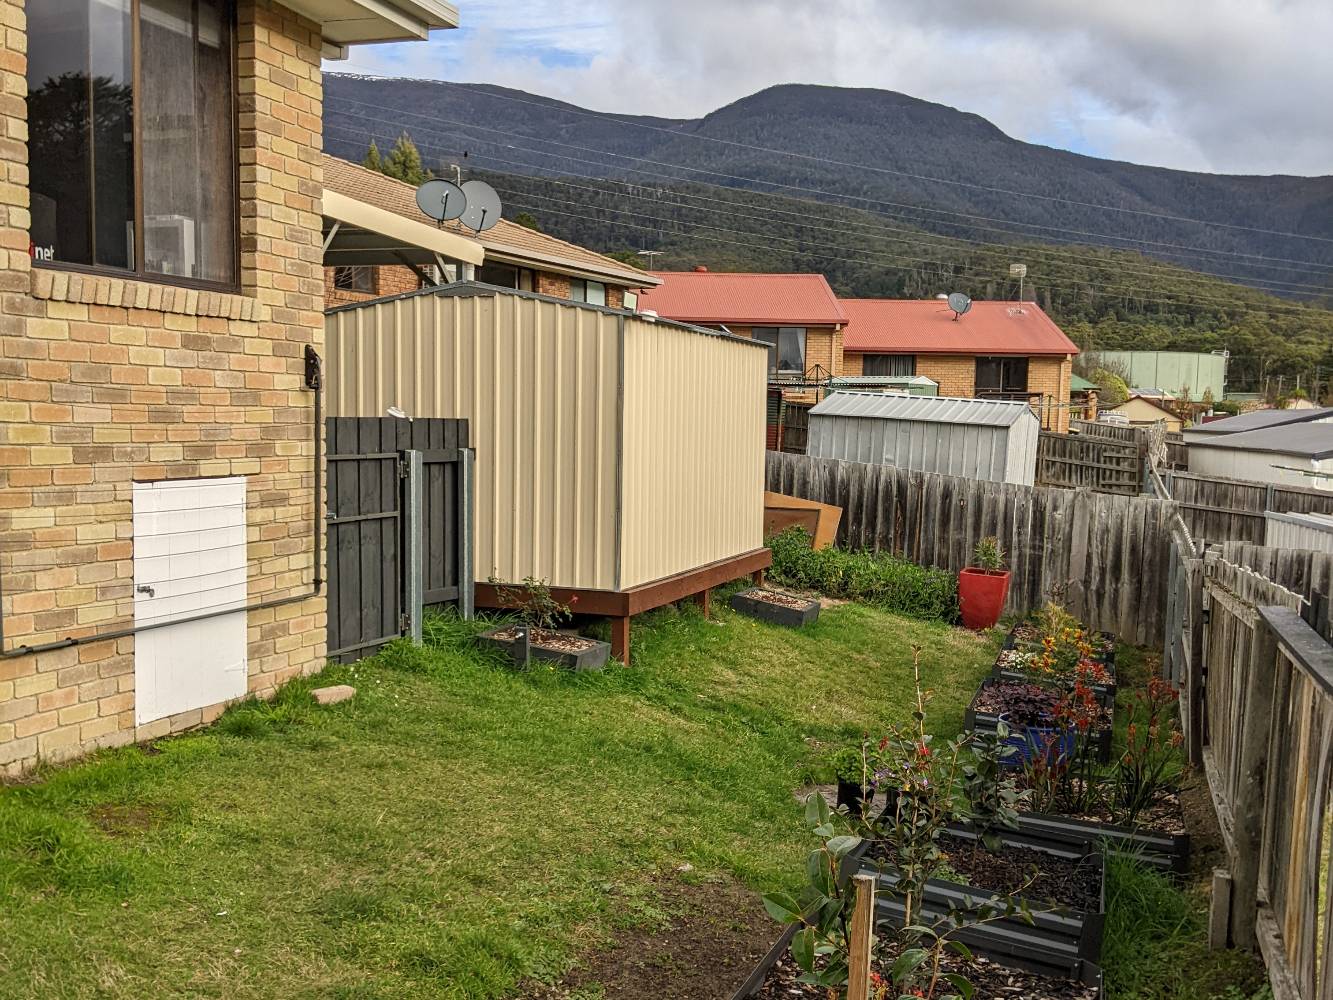 New rear garden beds with mountain view